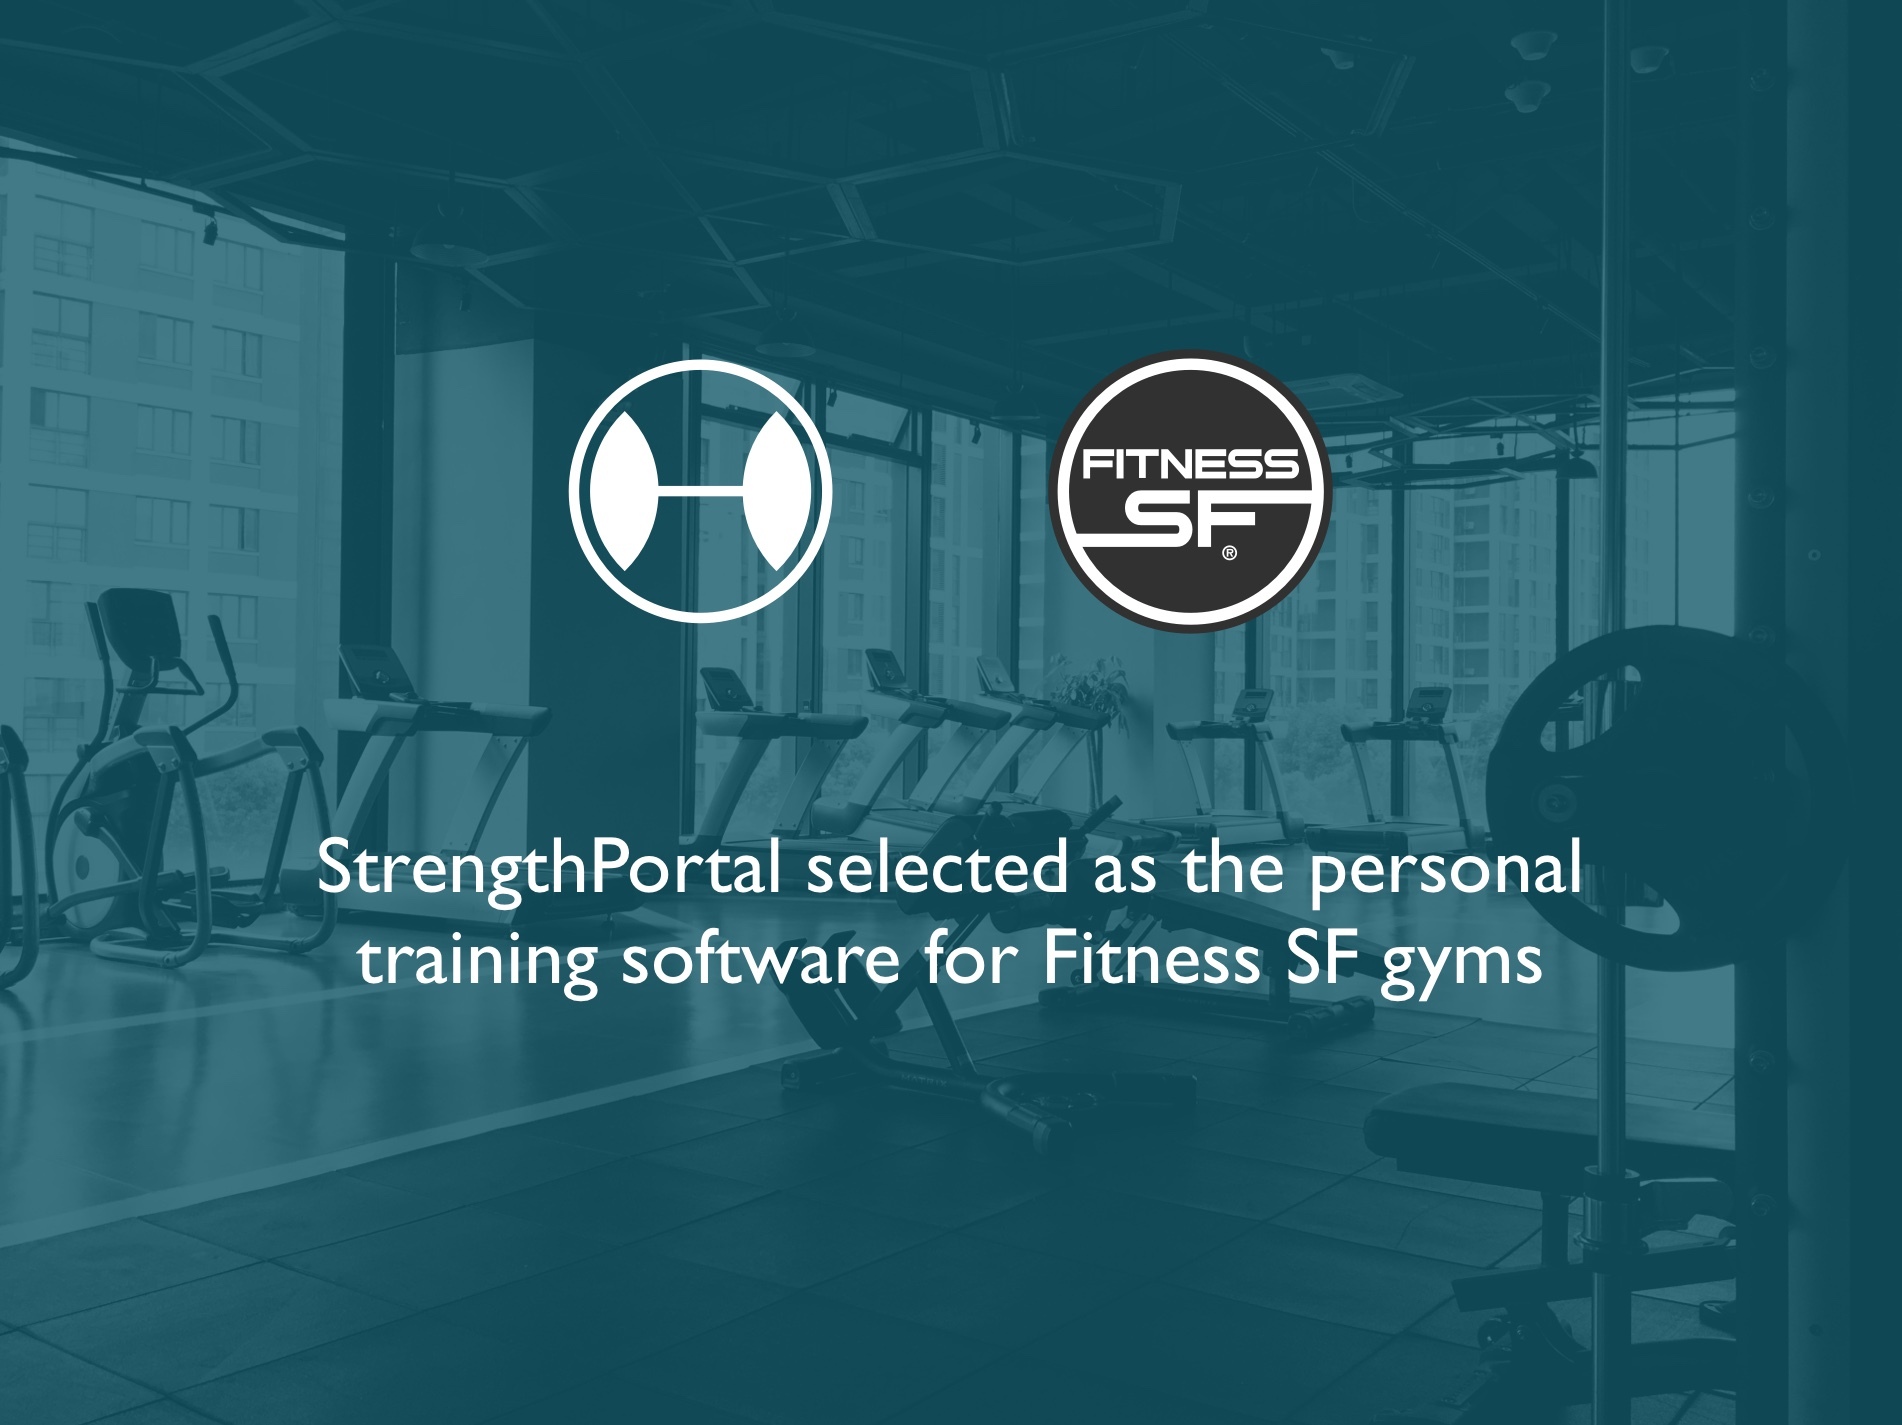 Press Release: FITNESS SF chooses StrengthPortal as personal training software partner